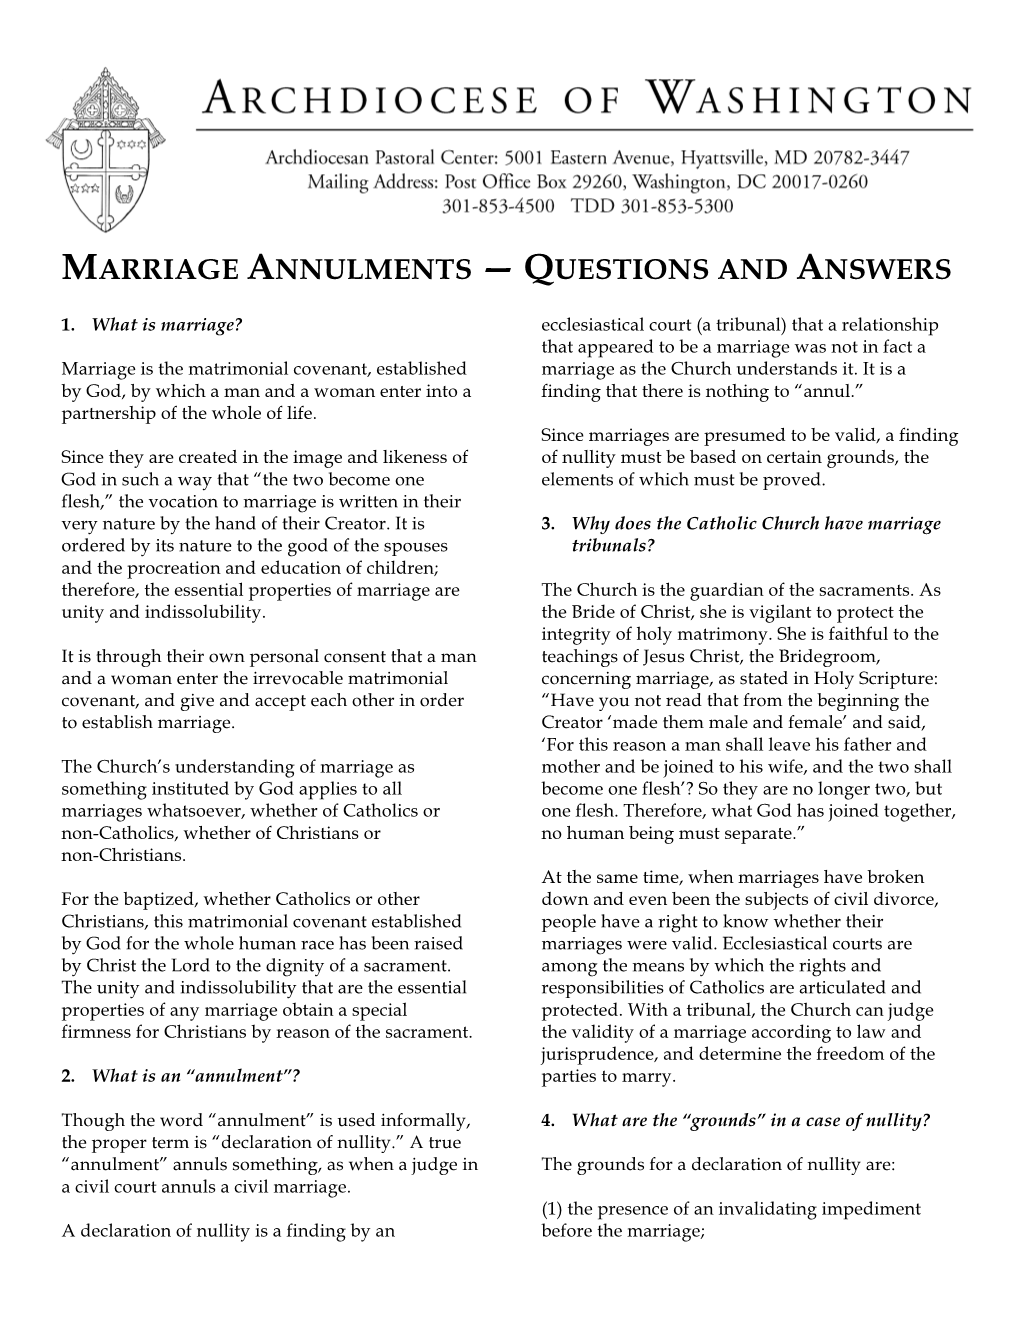 Marriage Annulments — Questions and Answers